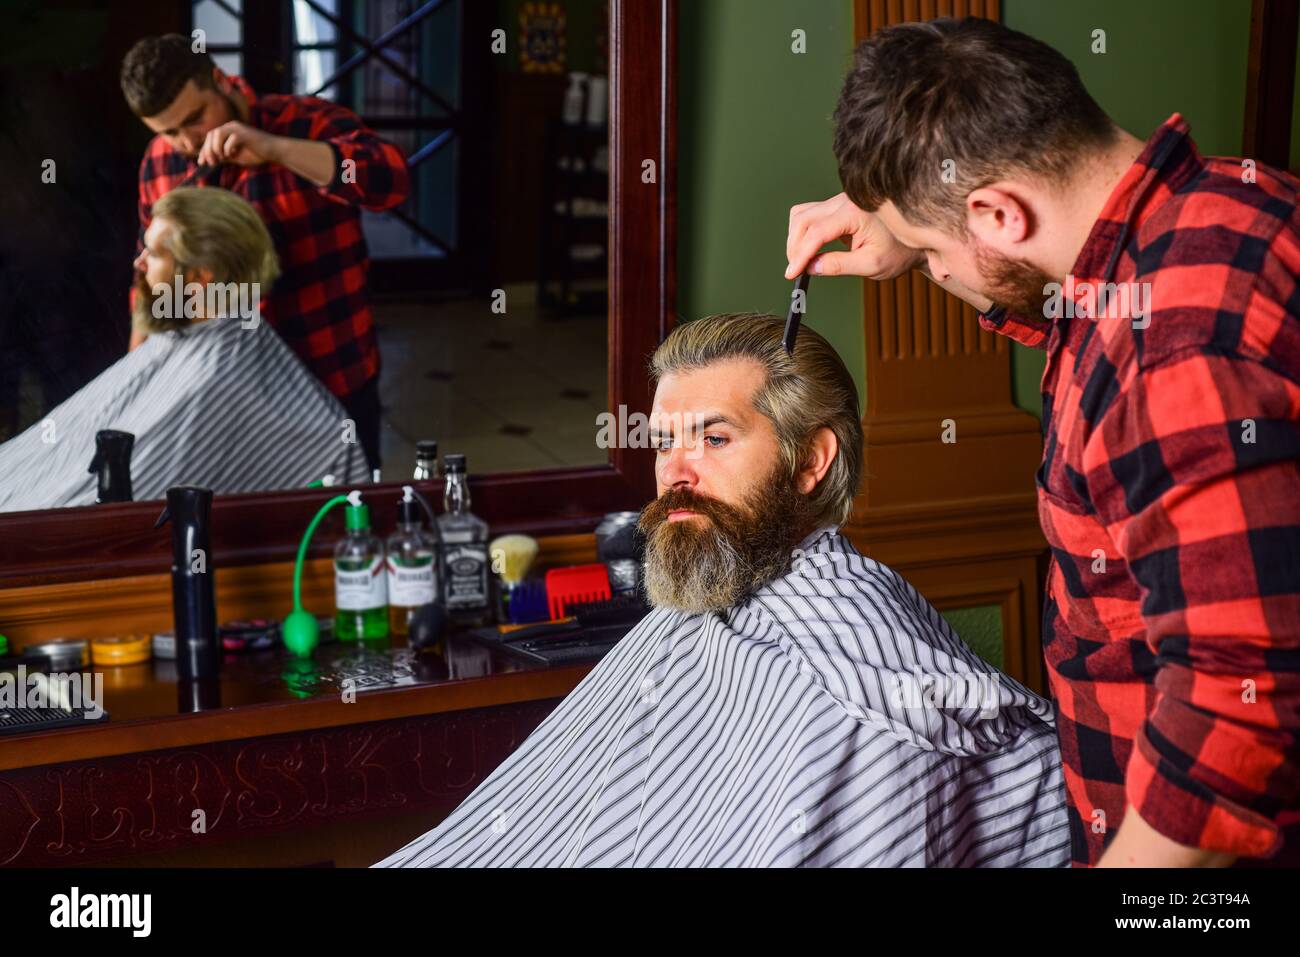 Professional hairstylist in barbershop interior. Hipster client getting ...